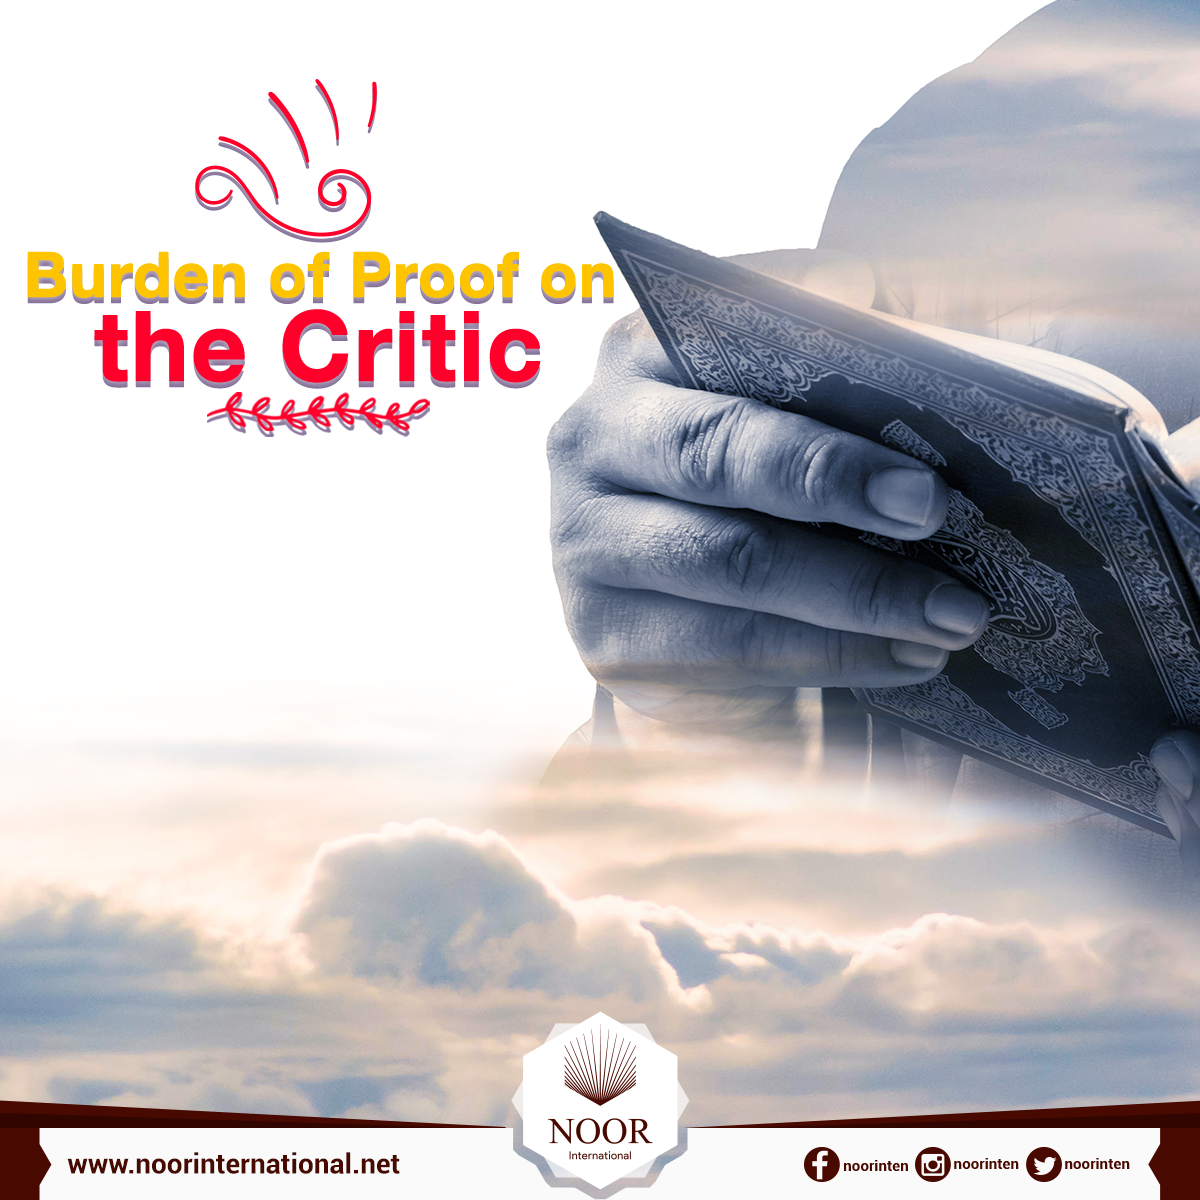 Burden of Proof on the Critic